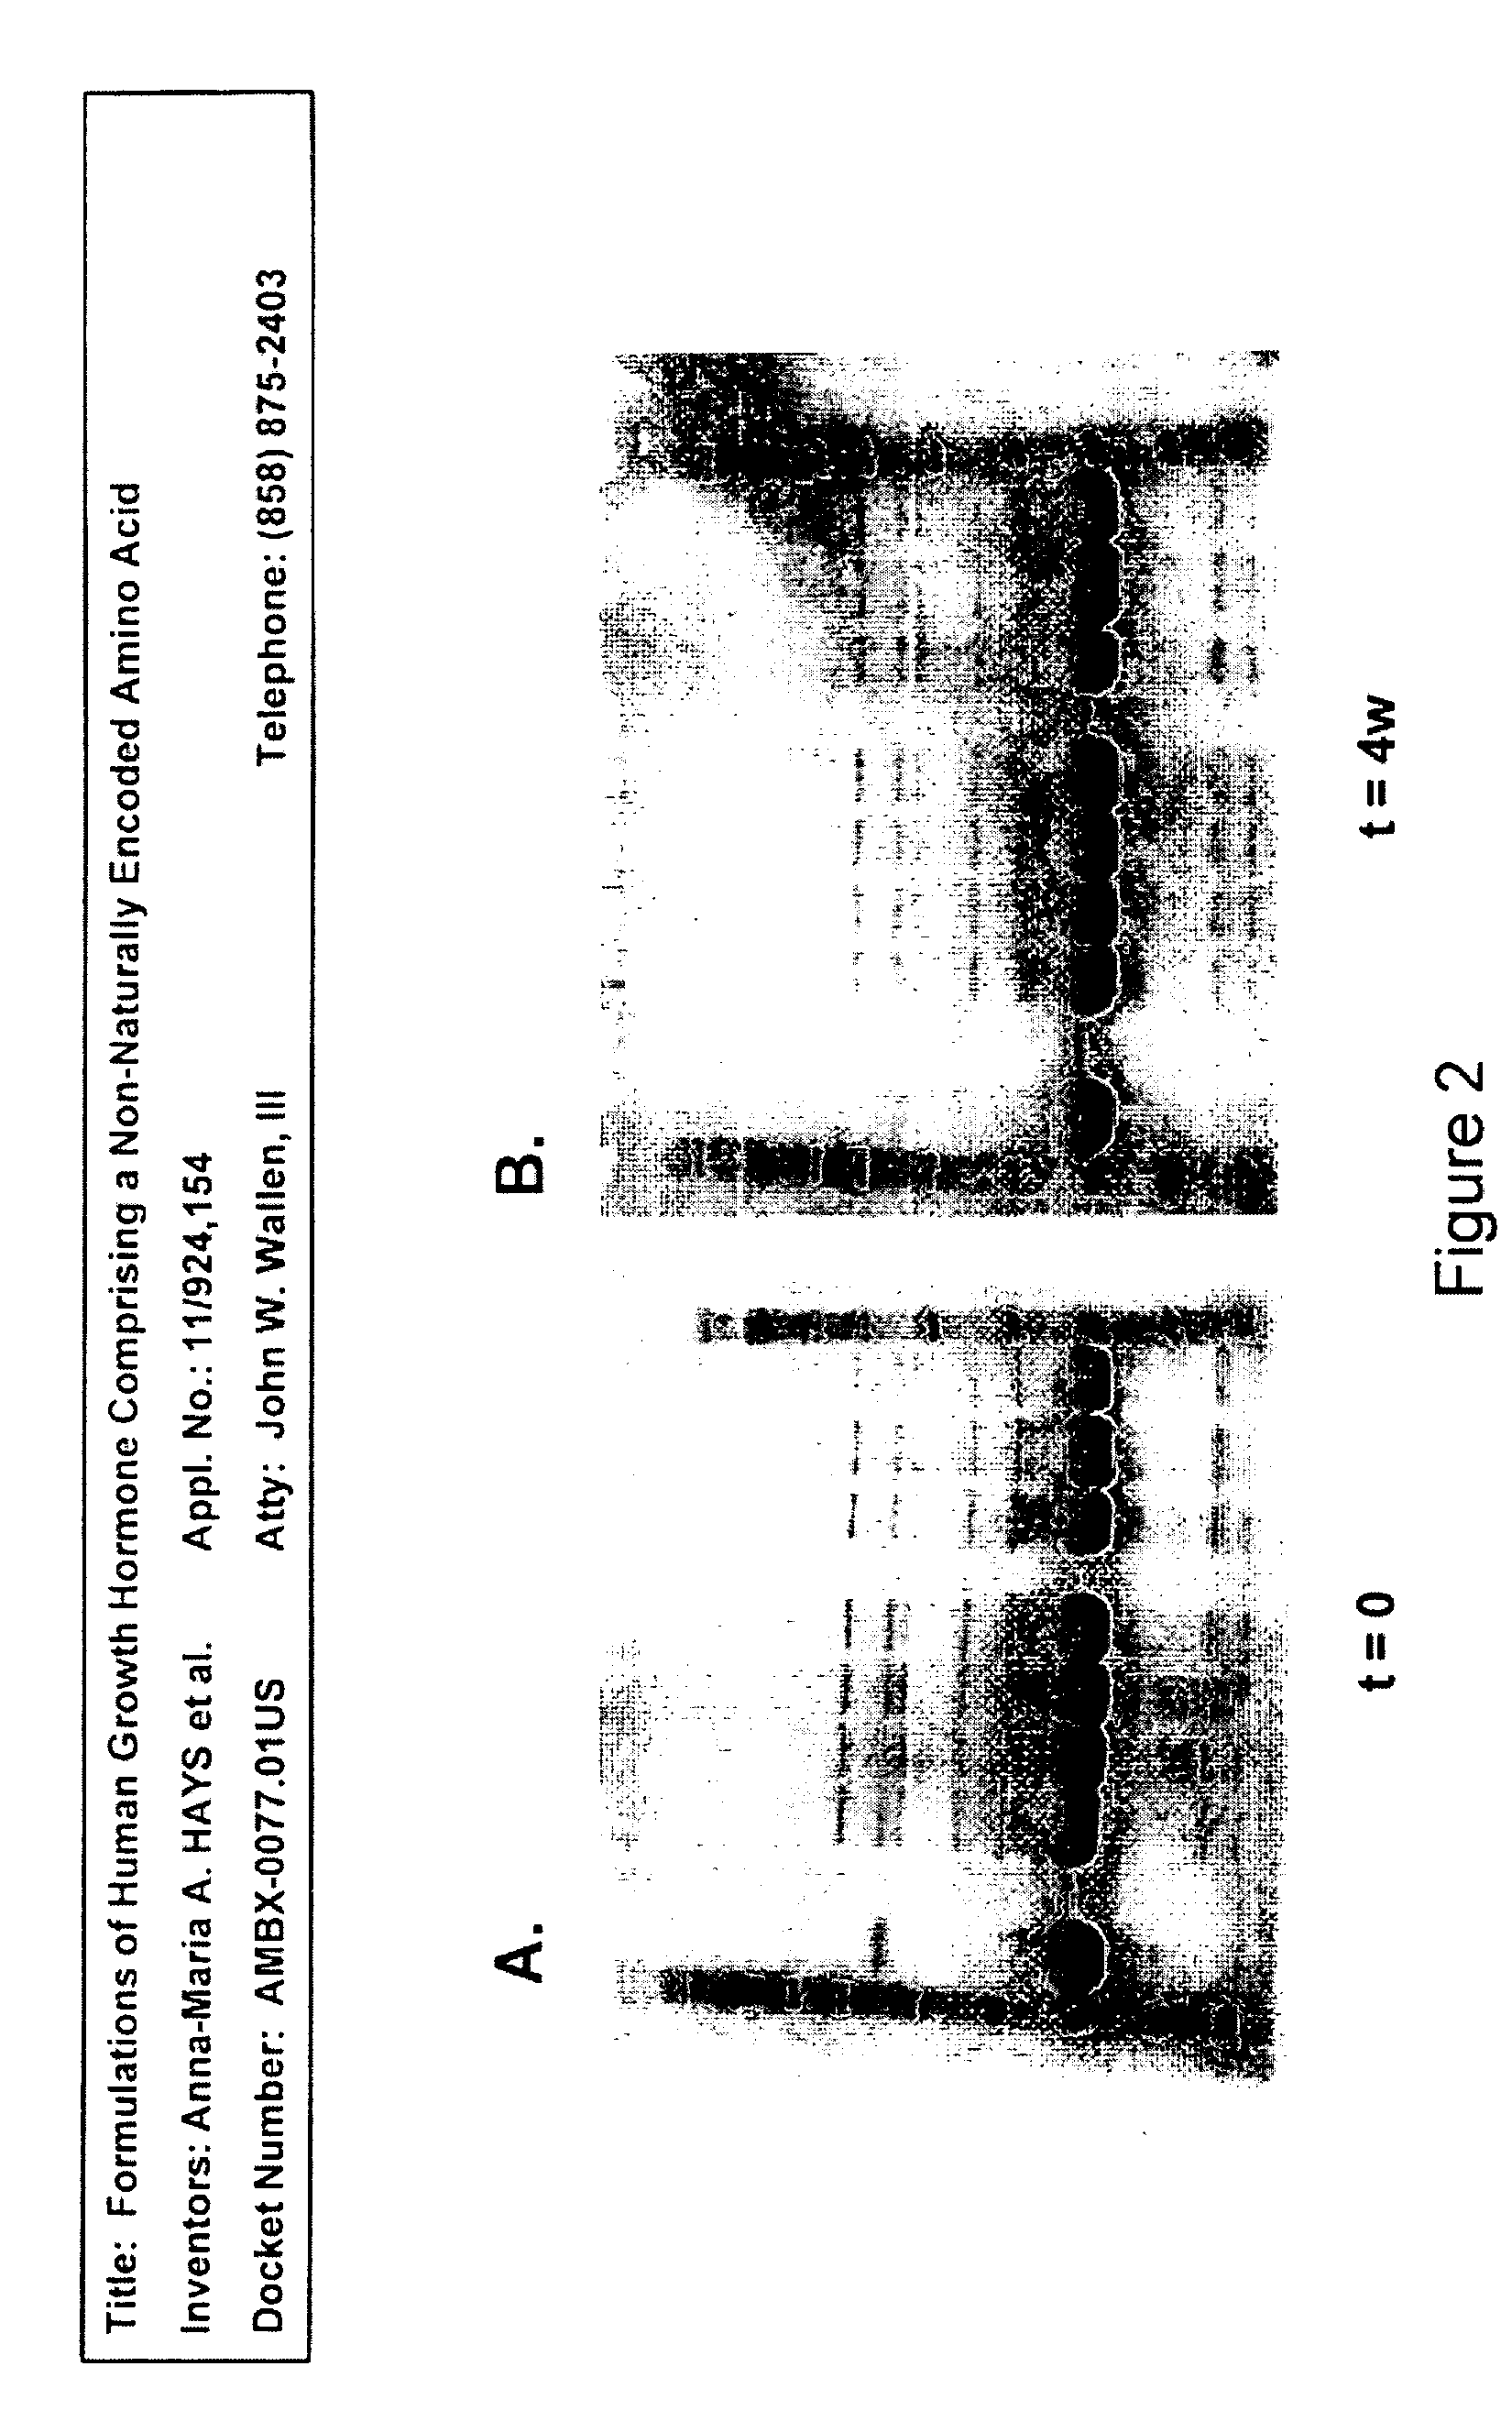 Formulations of Human Growth Hormone Comprising a Non-Naturally Encoded Amino Acid